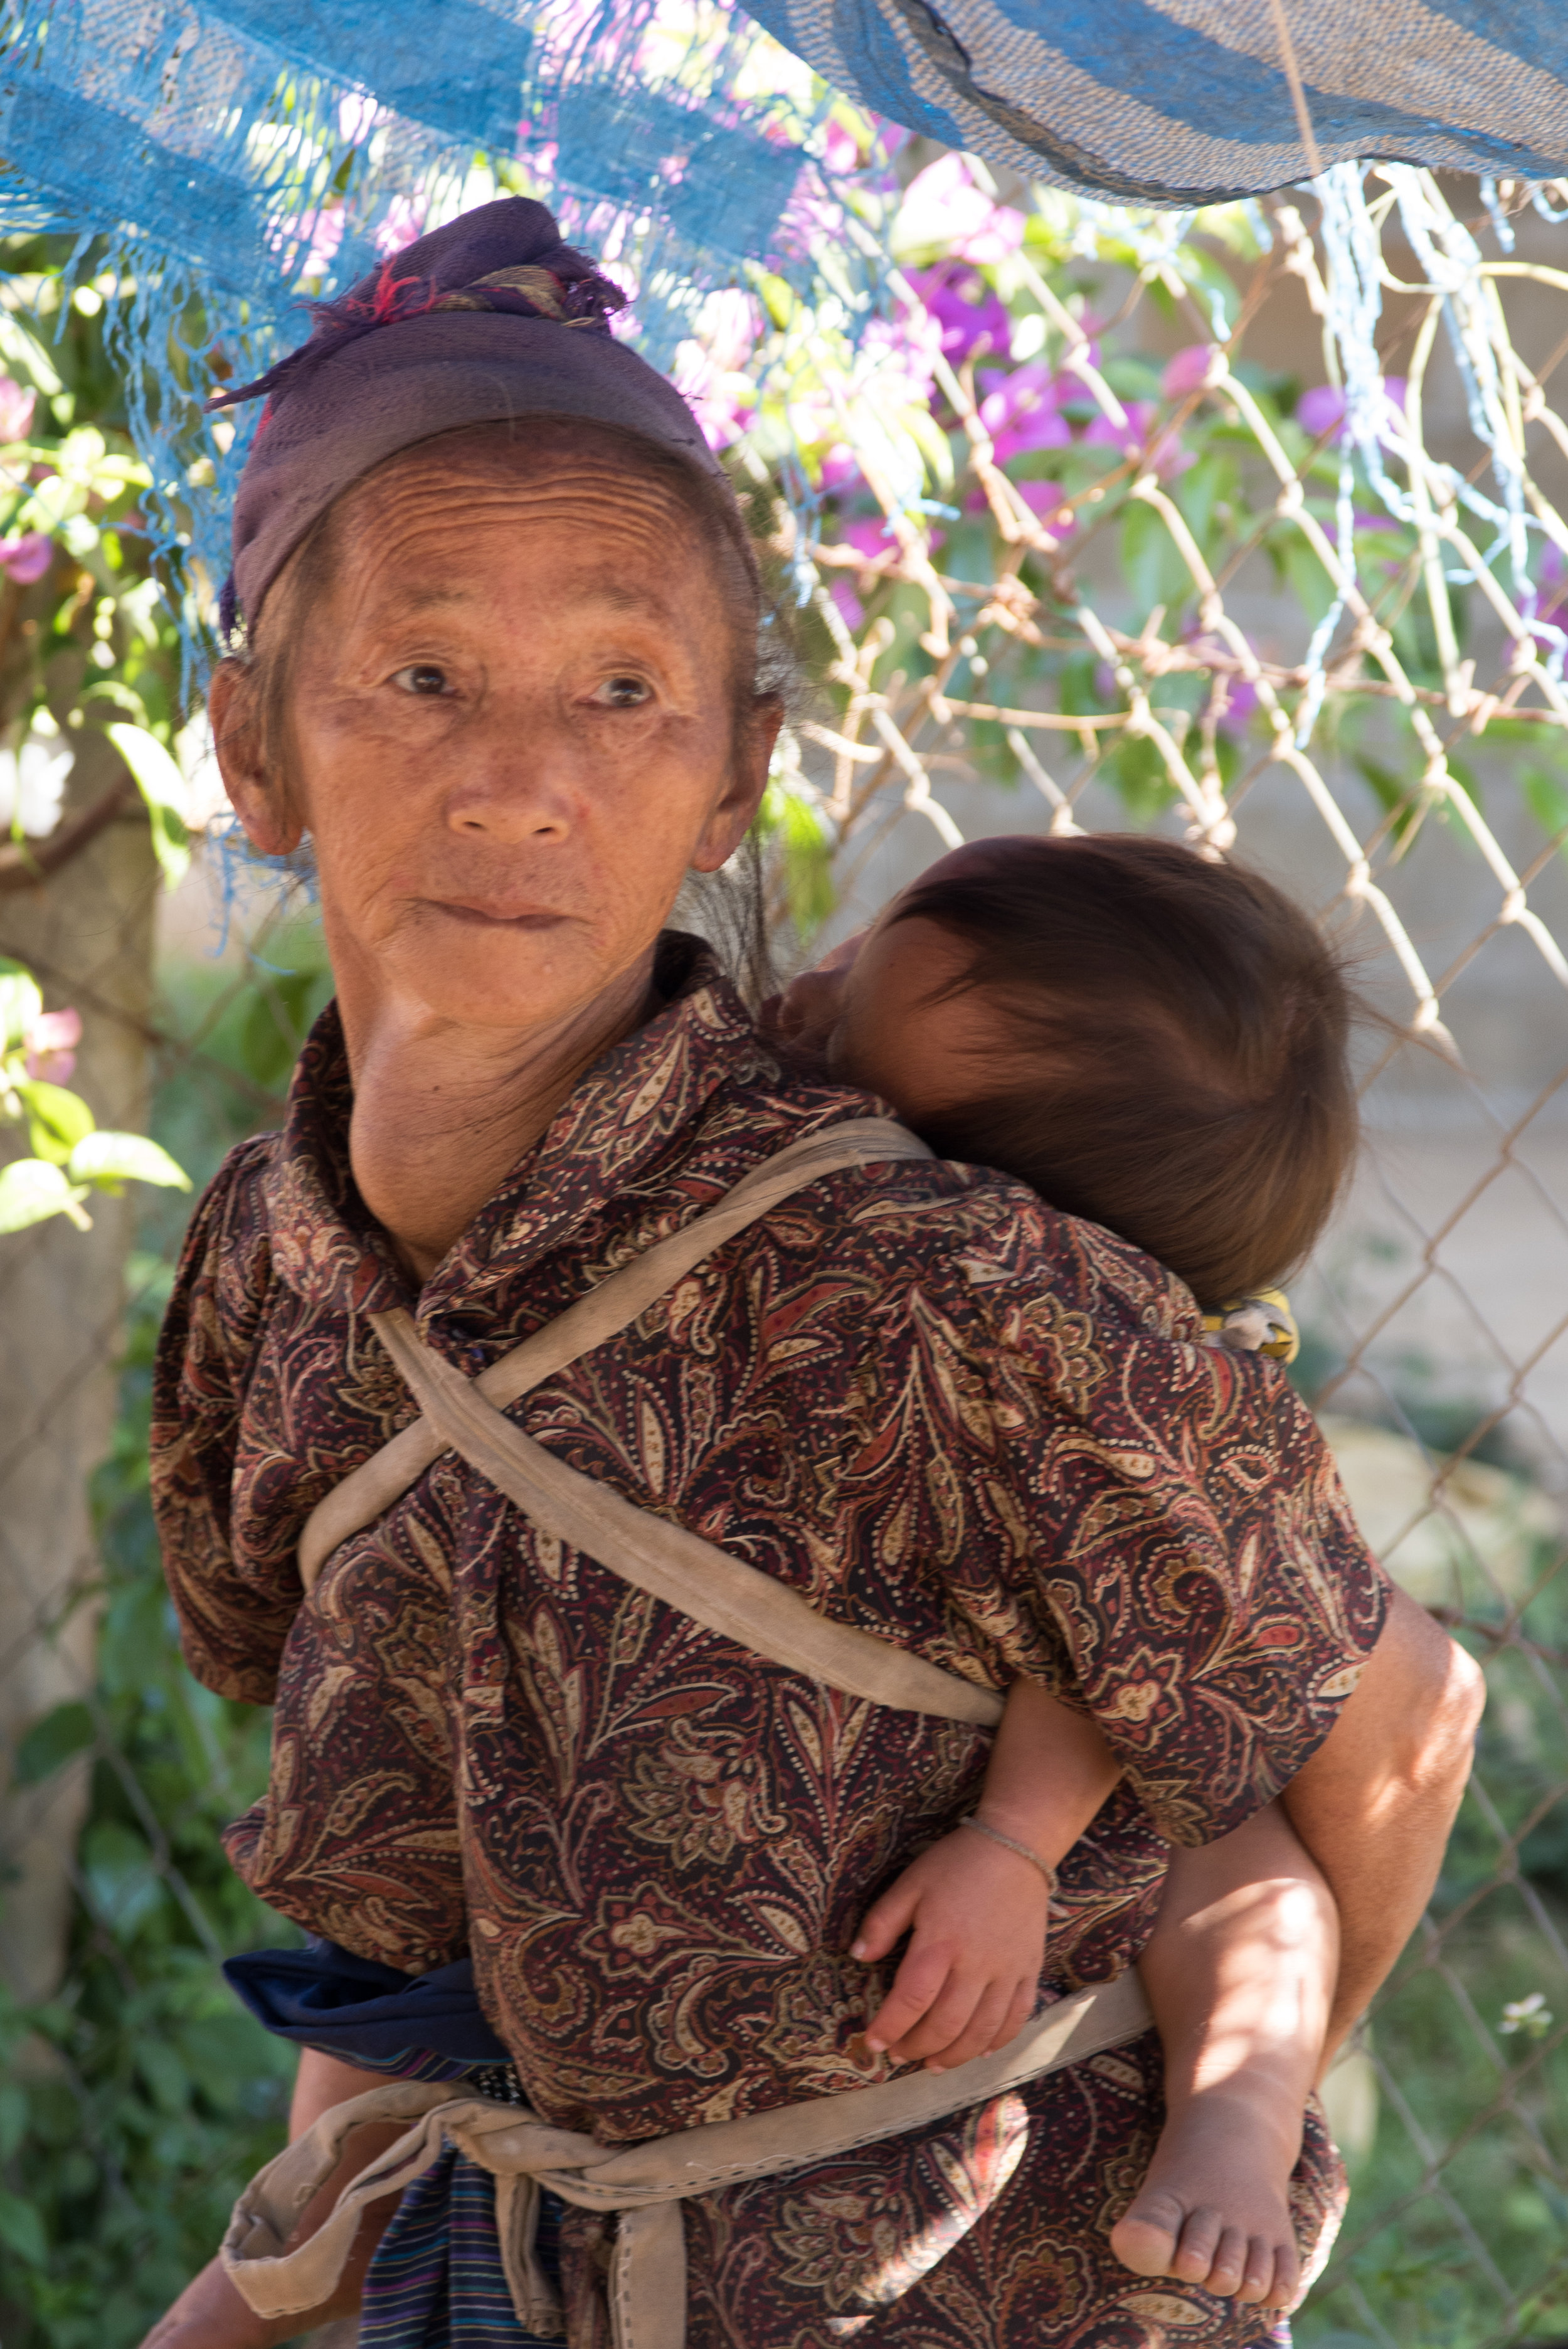 Grandmother and child in village, Ban Phajao, Laos